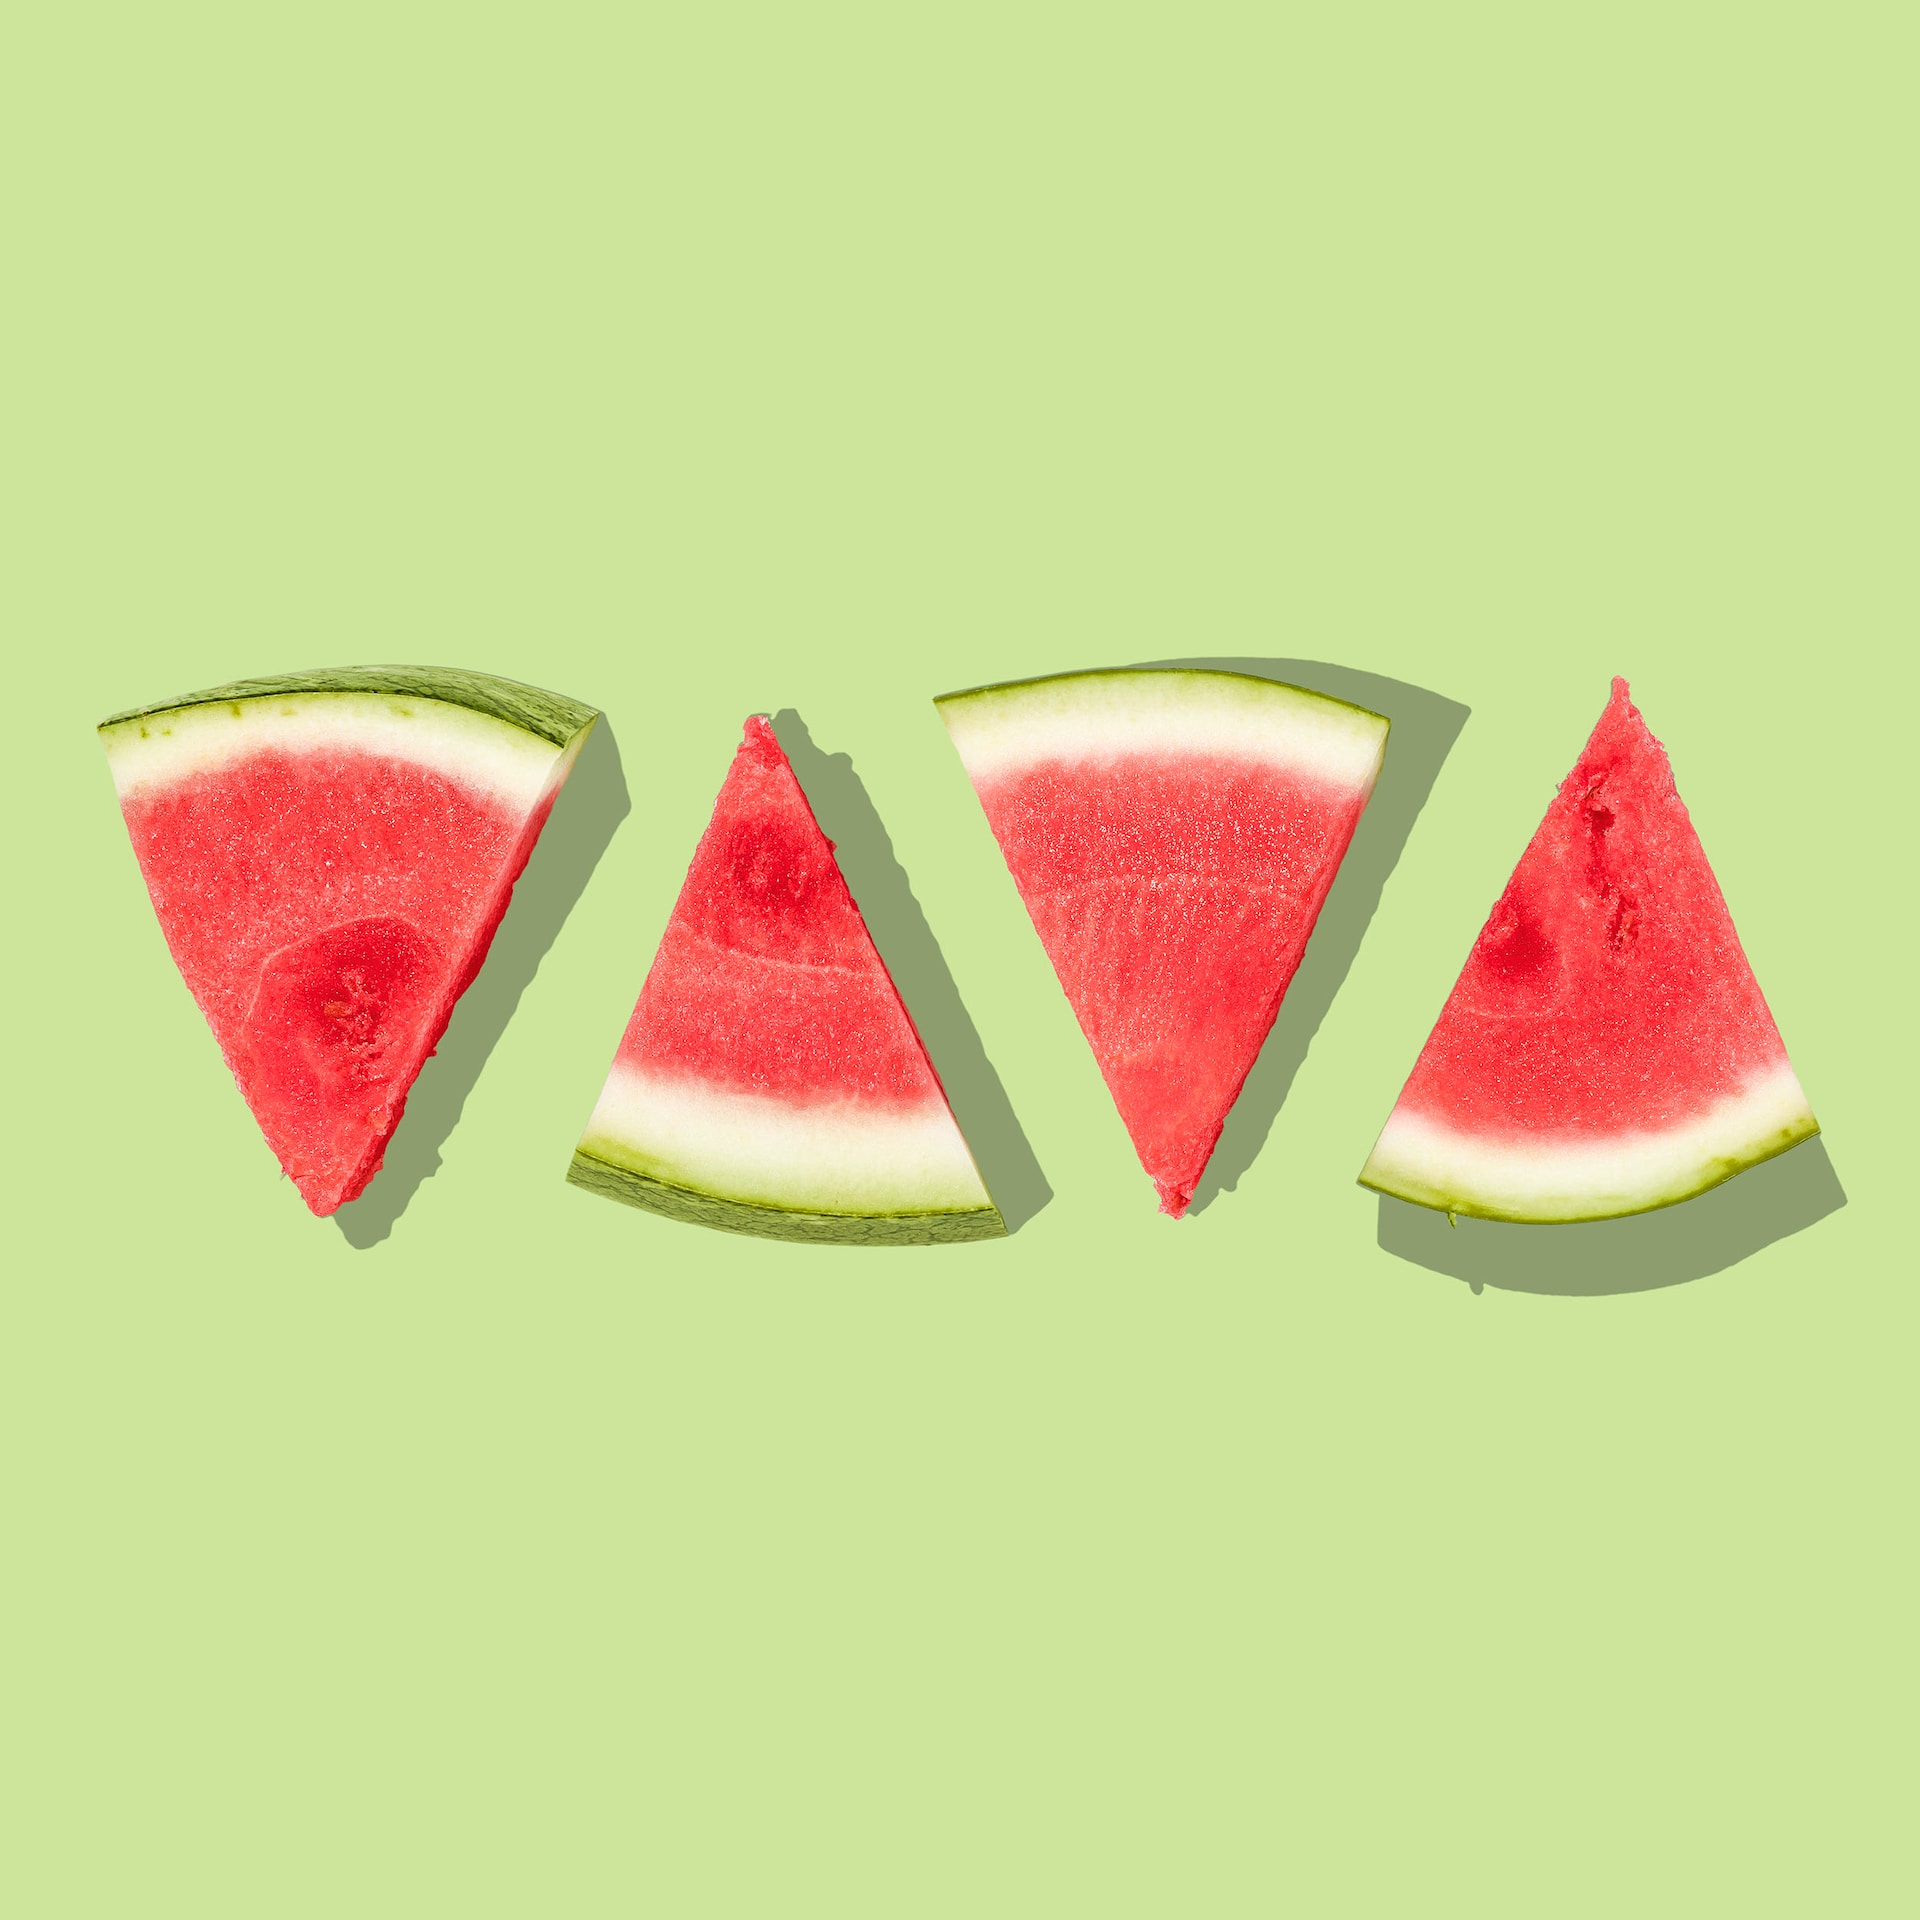 Juicy Delights: A Guide to Slicing and Enjoying a Watermelon